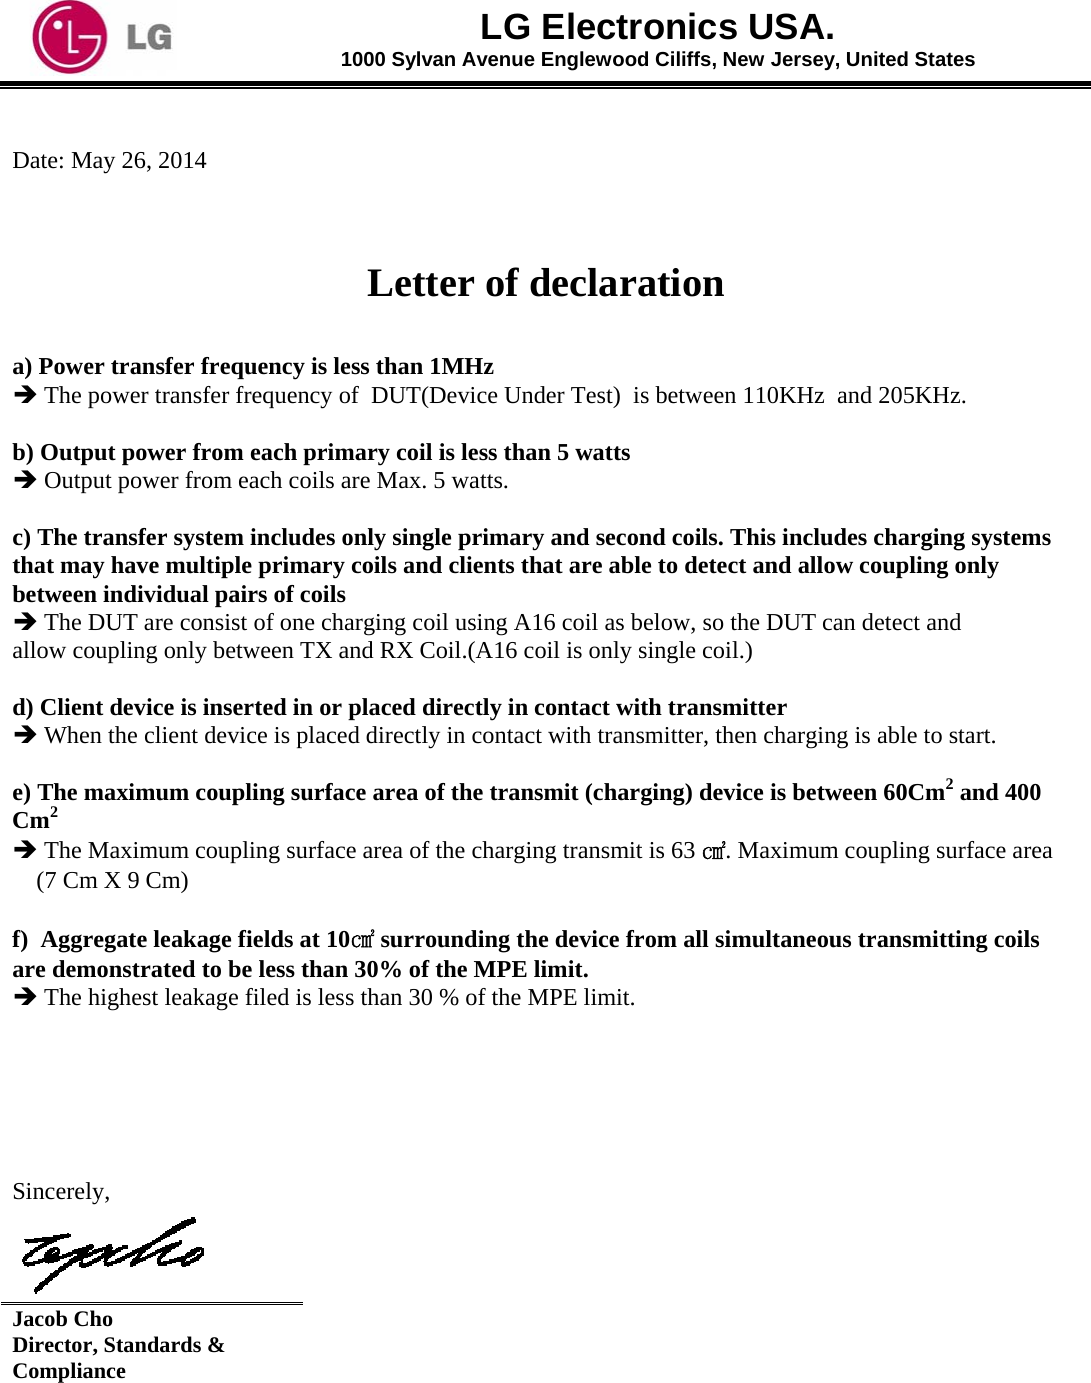  LG Electronics USA. 1000 Sylvan Avenue Englewood Ciliffs, New Jersey, United States   Date: May 26, 2014    Letter of declaration  a) Power transfer frequency is less than 1MHz   The power transfer frequency of  DUT(Device Under Test)  is between 110KHz  and 205KHz.     b) Output power from each primary coil is less than 5 watts   Output power from each coils are Max. 5 watts.     c) The transfer system includes only single primary and second coils. This includes charging systems that may have multiple primary coils and clients that are able to detect and allow coupling only between individual pairs of coils   The DUT are consist of one charging coil using A16 coil as below, so the DUT can detect and    allow coupling only between TX and RX Coil.(A16 coil is only single coil.)       d) Client device is inserted in or placed directly in contact with transmitter   When the client device is placed directly in contact with transmitter, then charging is able to start.     e) The maximum coupling surface area of the transmit (charging) device is between 60Cm2 and 400 Cm2   The Maximum coupling surface area of the charging transmit is 63 ㎠. Maximum coupling surface area (7 Cm X 9 Cm)   f)  Aggregate leakage fields at 10㎠ surrounding the device from all simultaneous transmitting coils are demonstrated to be less than 30% of the MPE limit.  The highest leakage filed is less than 30 % of the MPE limit.      Sincerely,  Jacob Cho Director, Standards &amp; Compliance  